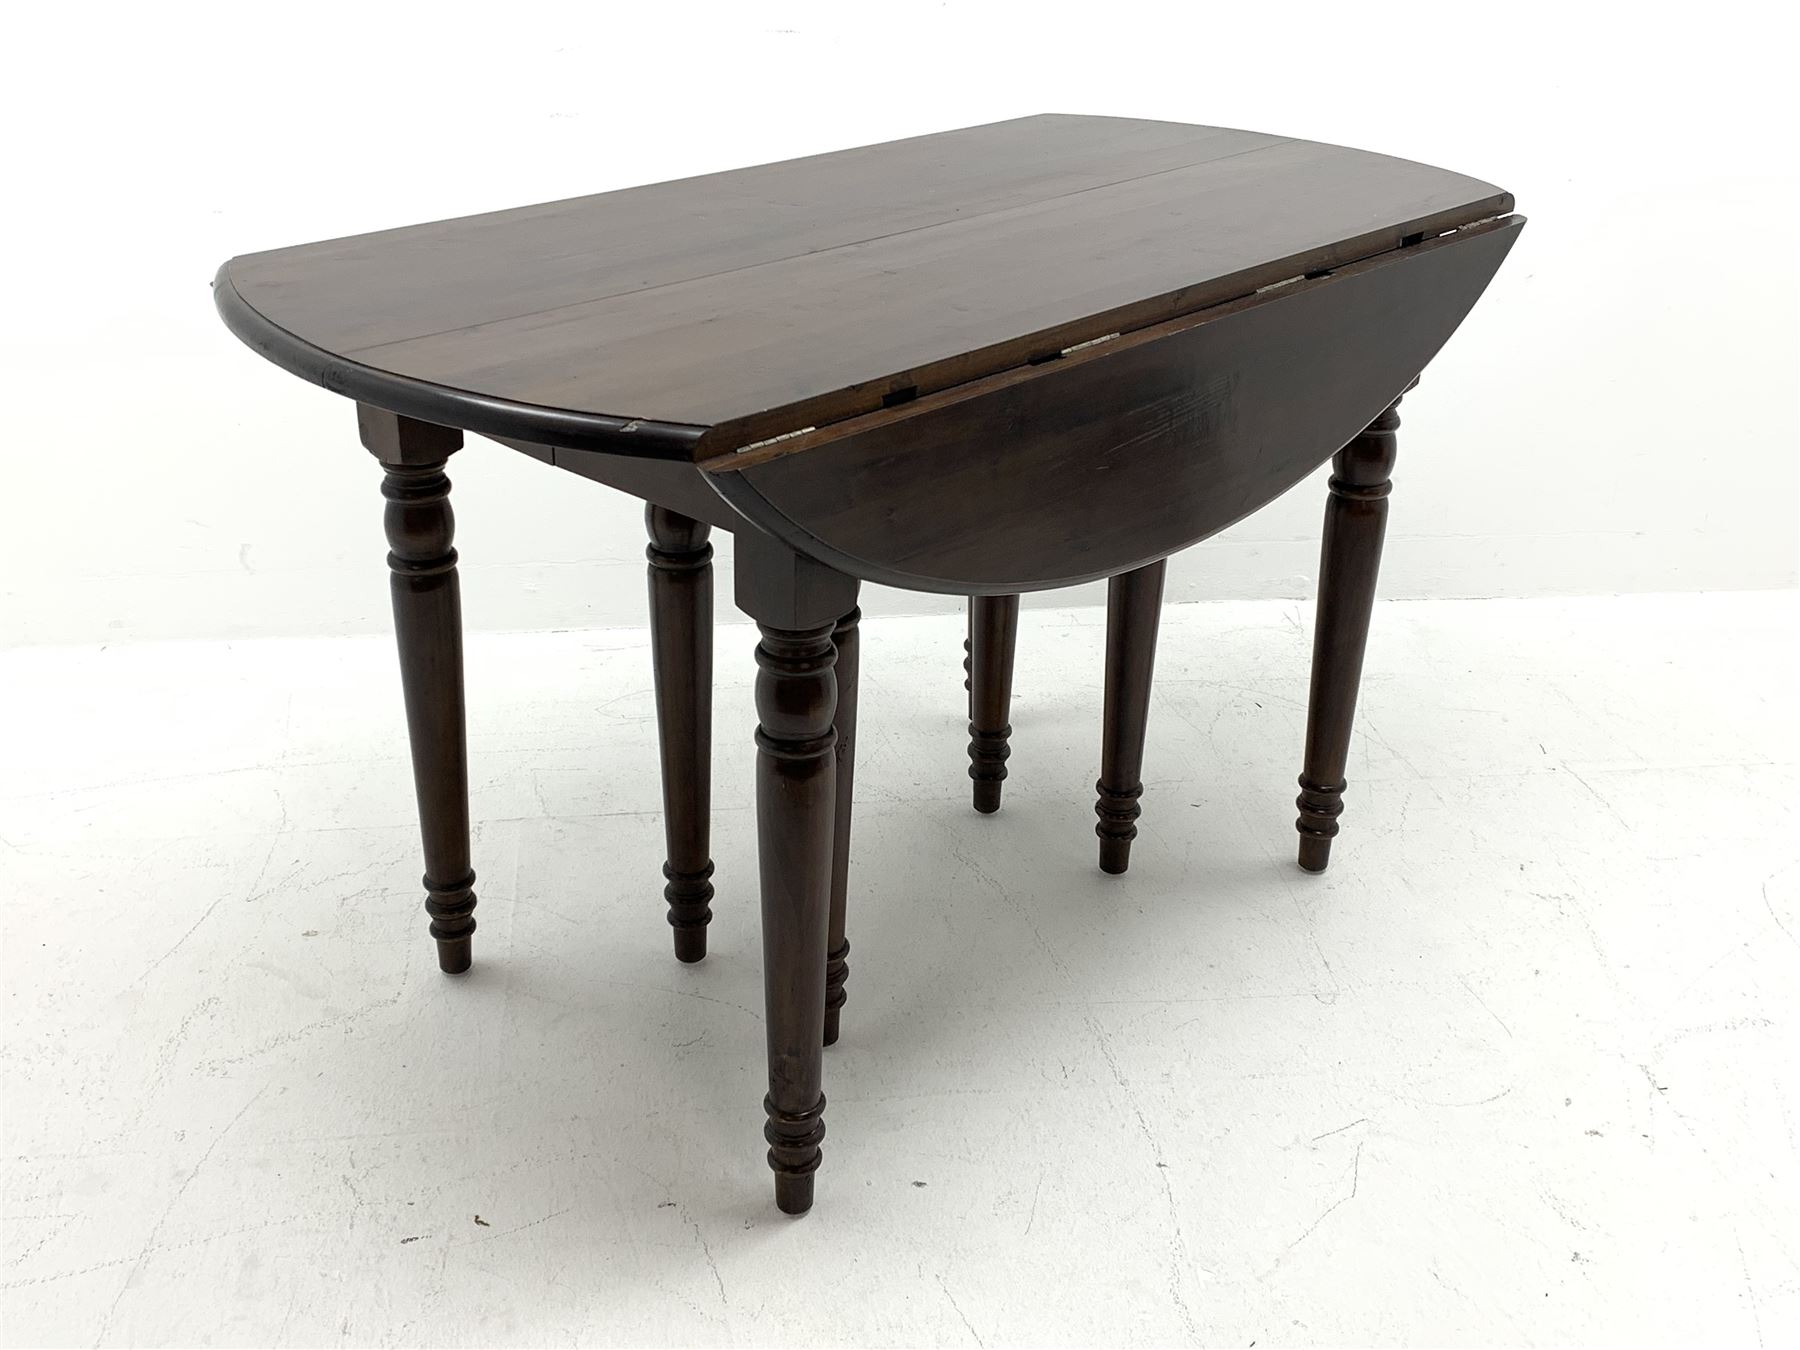 Oka Furniture - 'Petworth' French walnut extending drop leaf dining table with five additional leave - Image 2 of 4